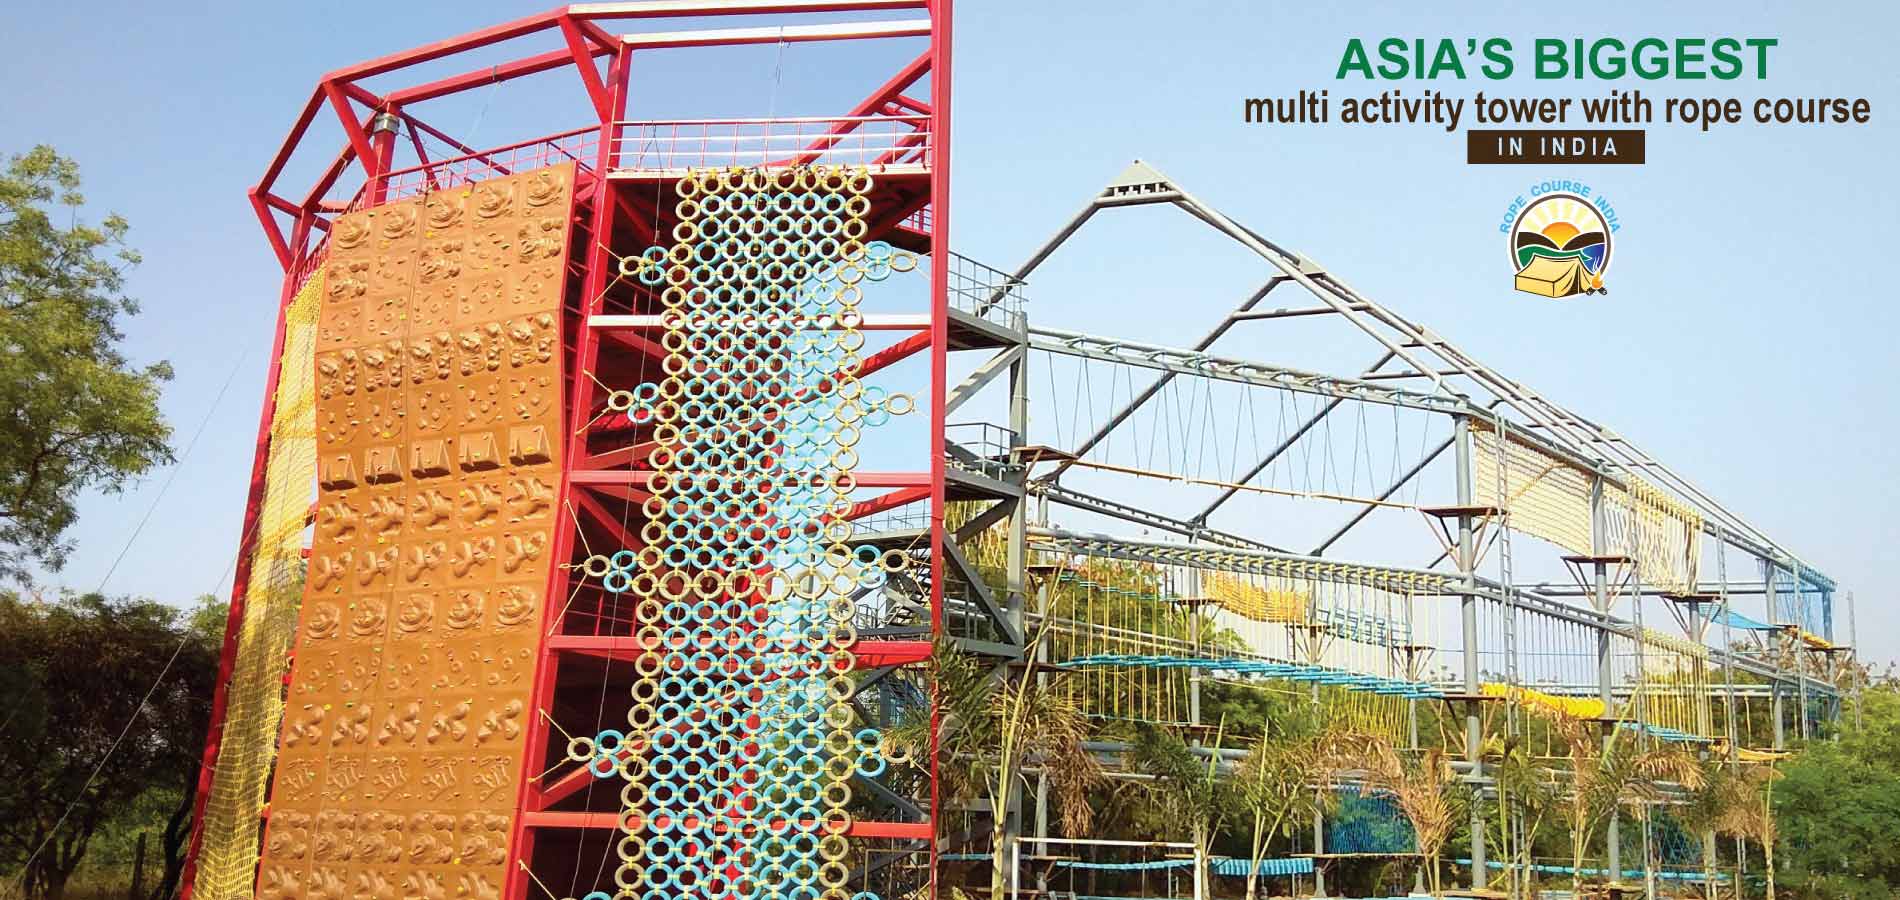 asia's biggest Multi Activity Tower with rope course